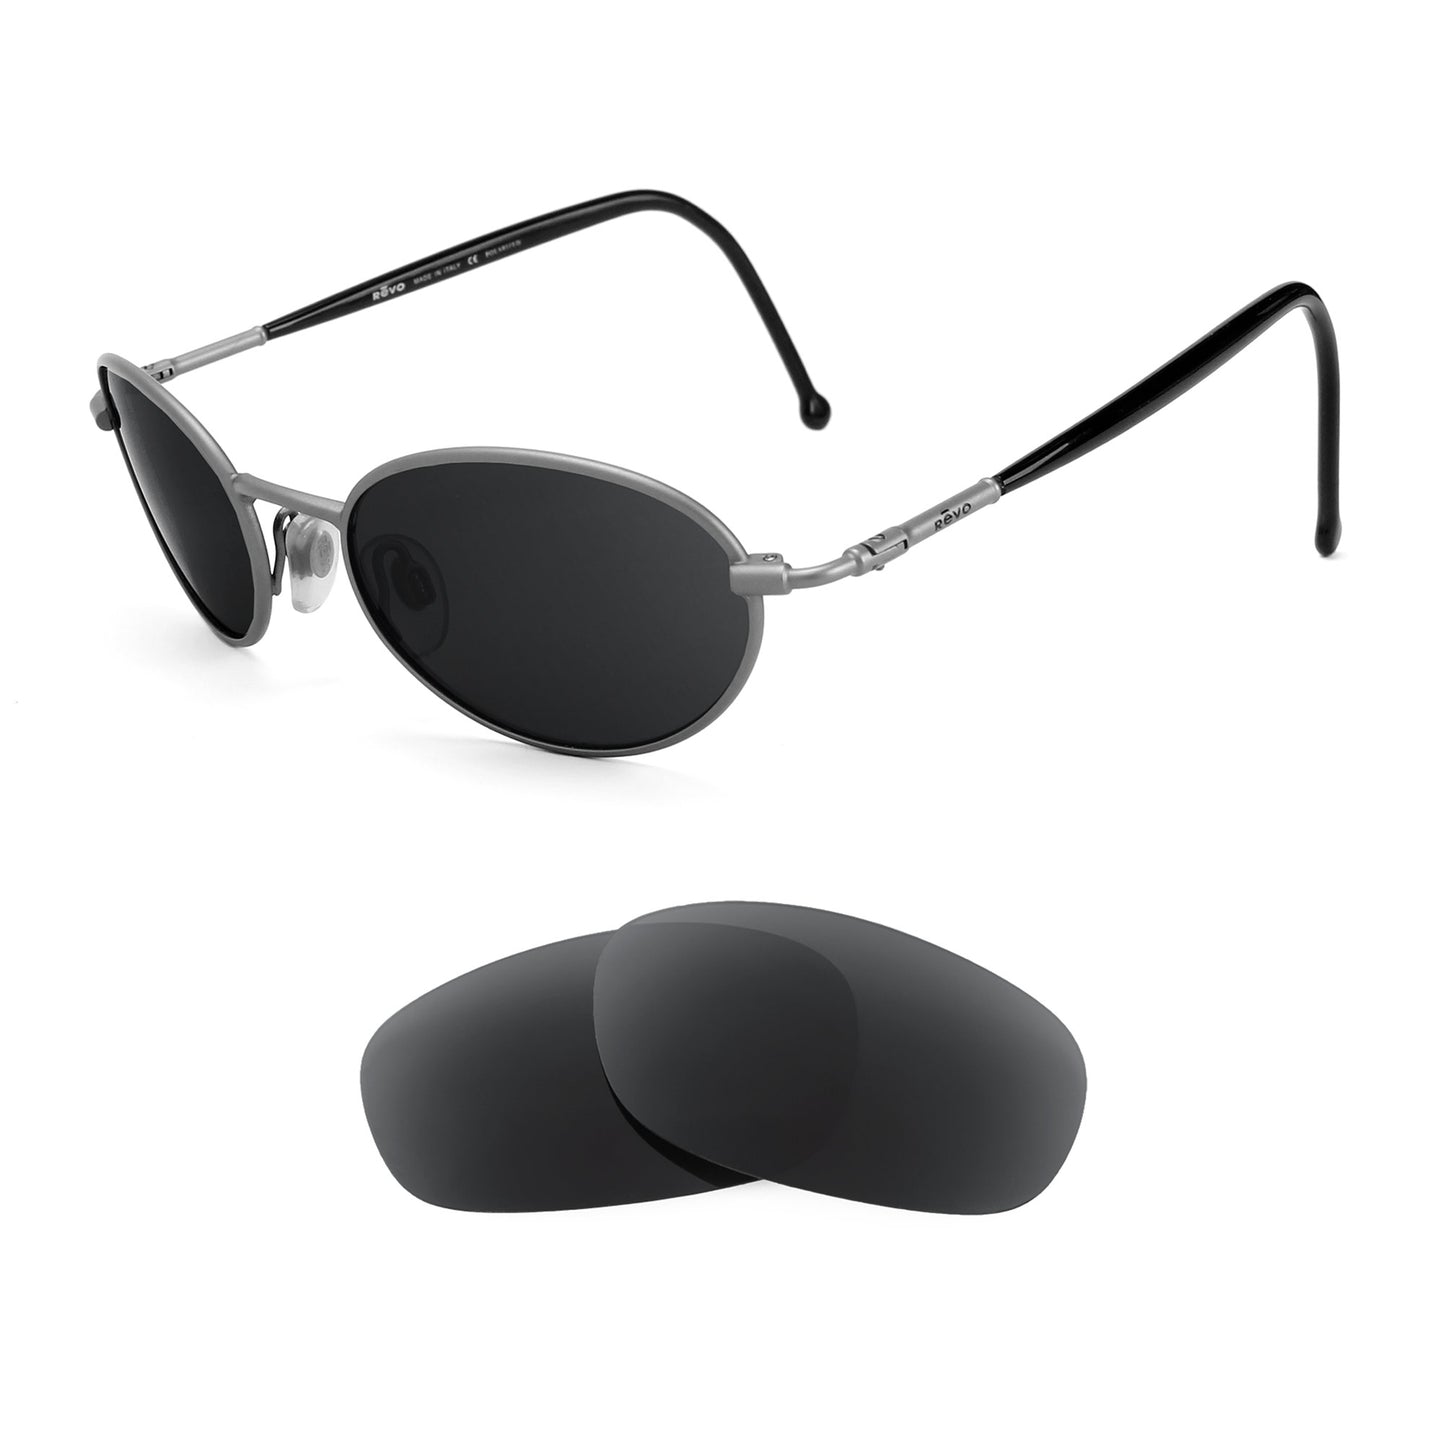 Revo 1121 sunglasses with replacement lenses